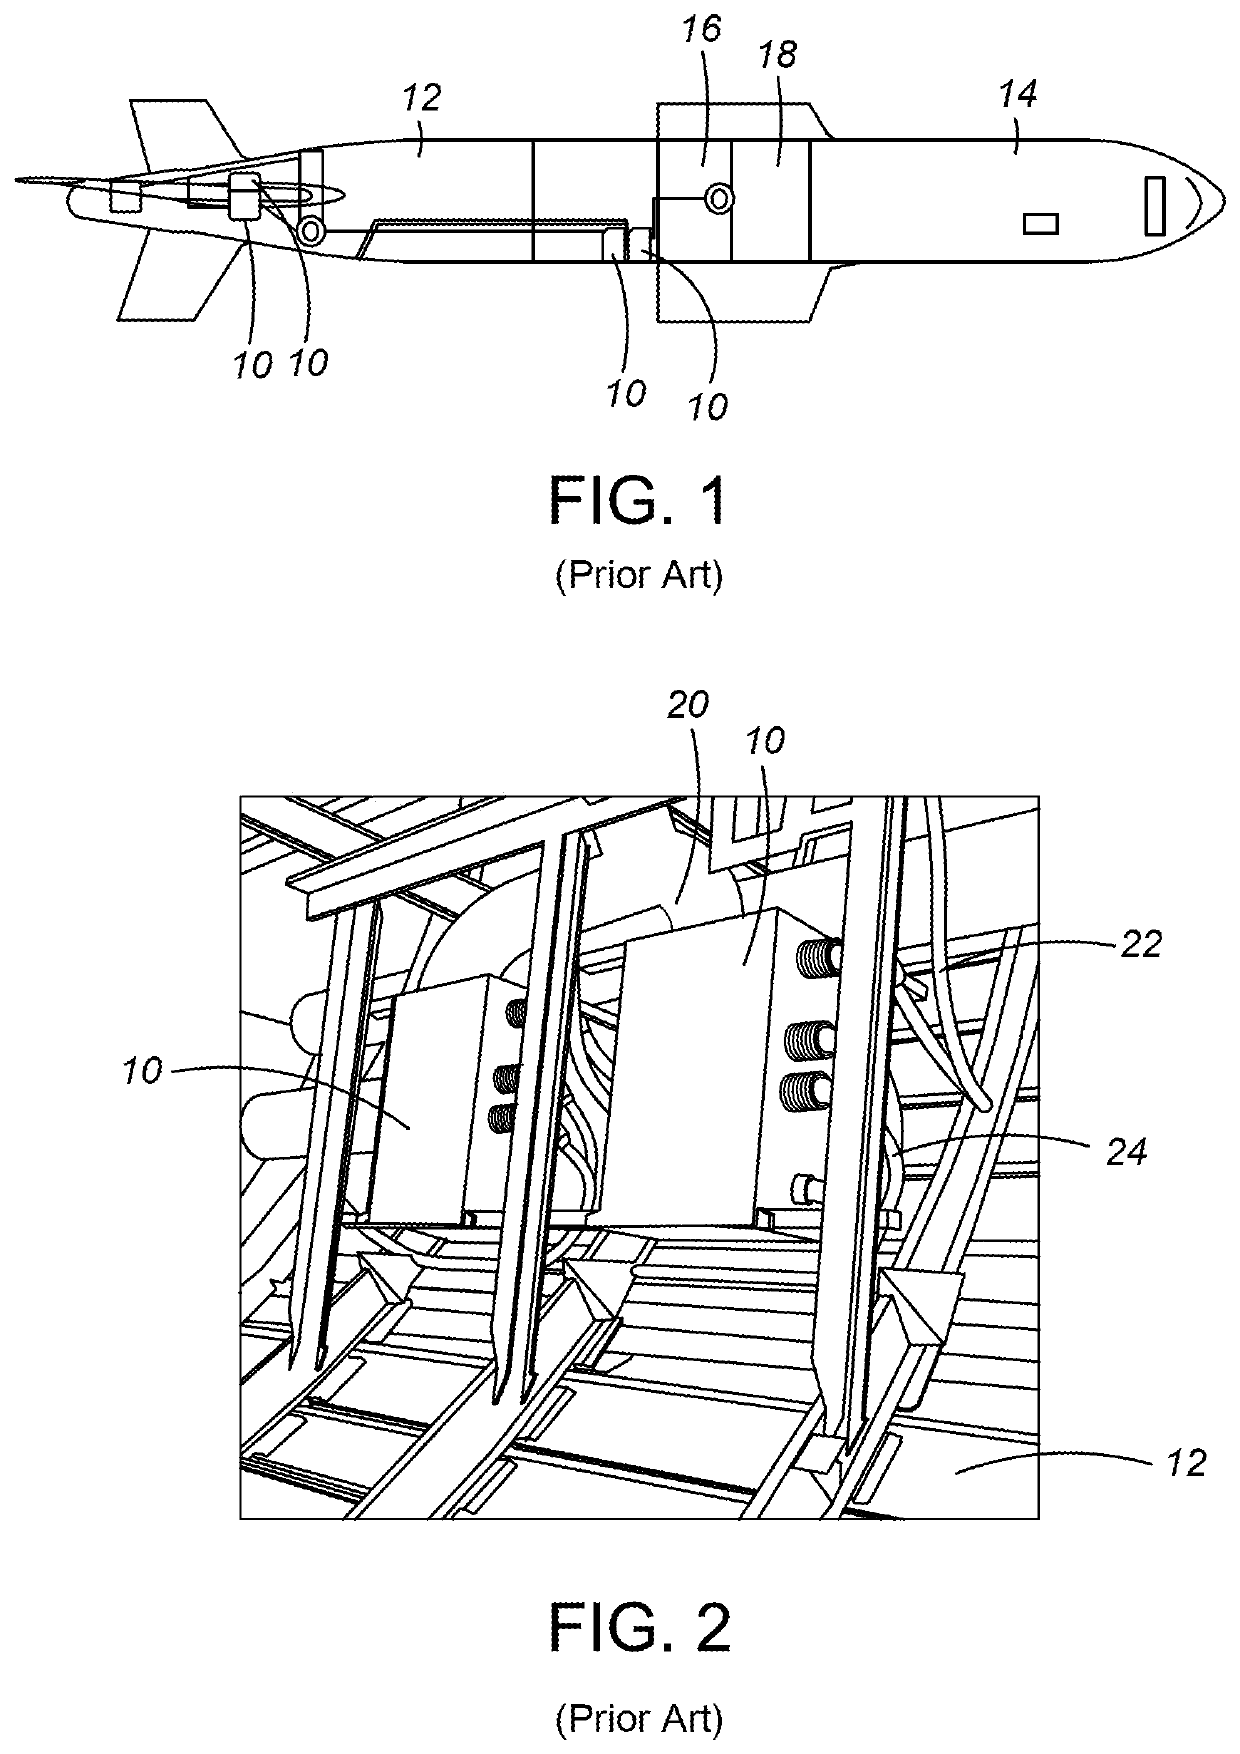 On-board removable container for cooling cargo materials and equipment in aircraft